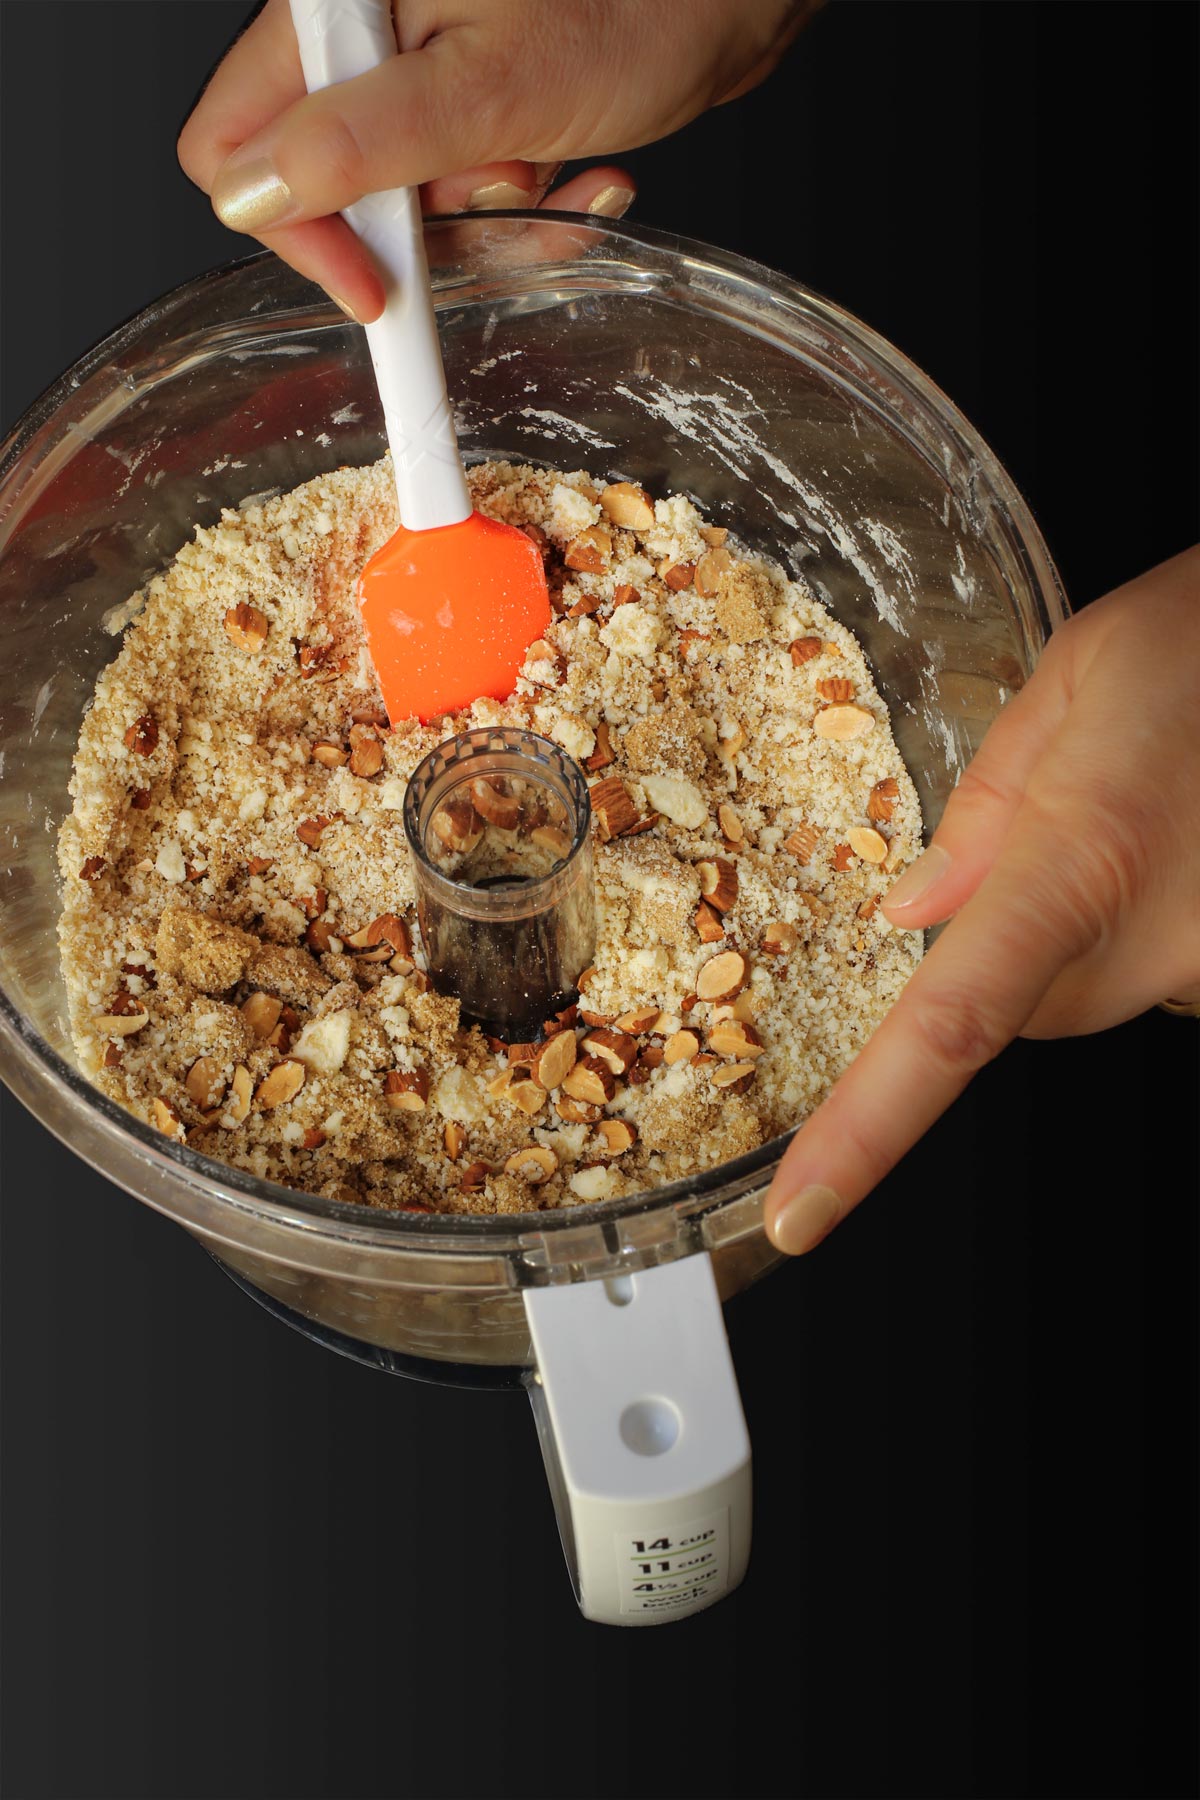 stirring together the crumbs with sugar and nuts.